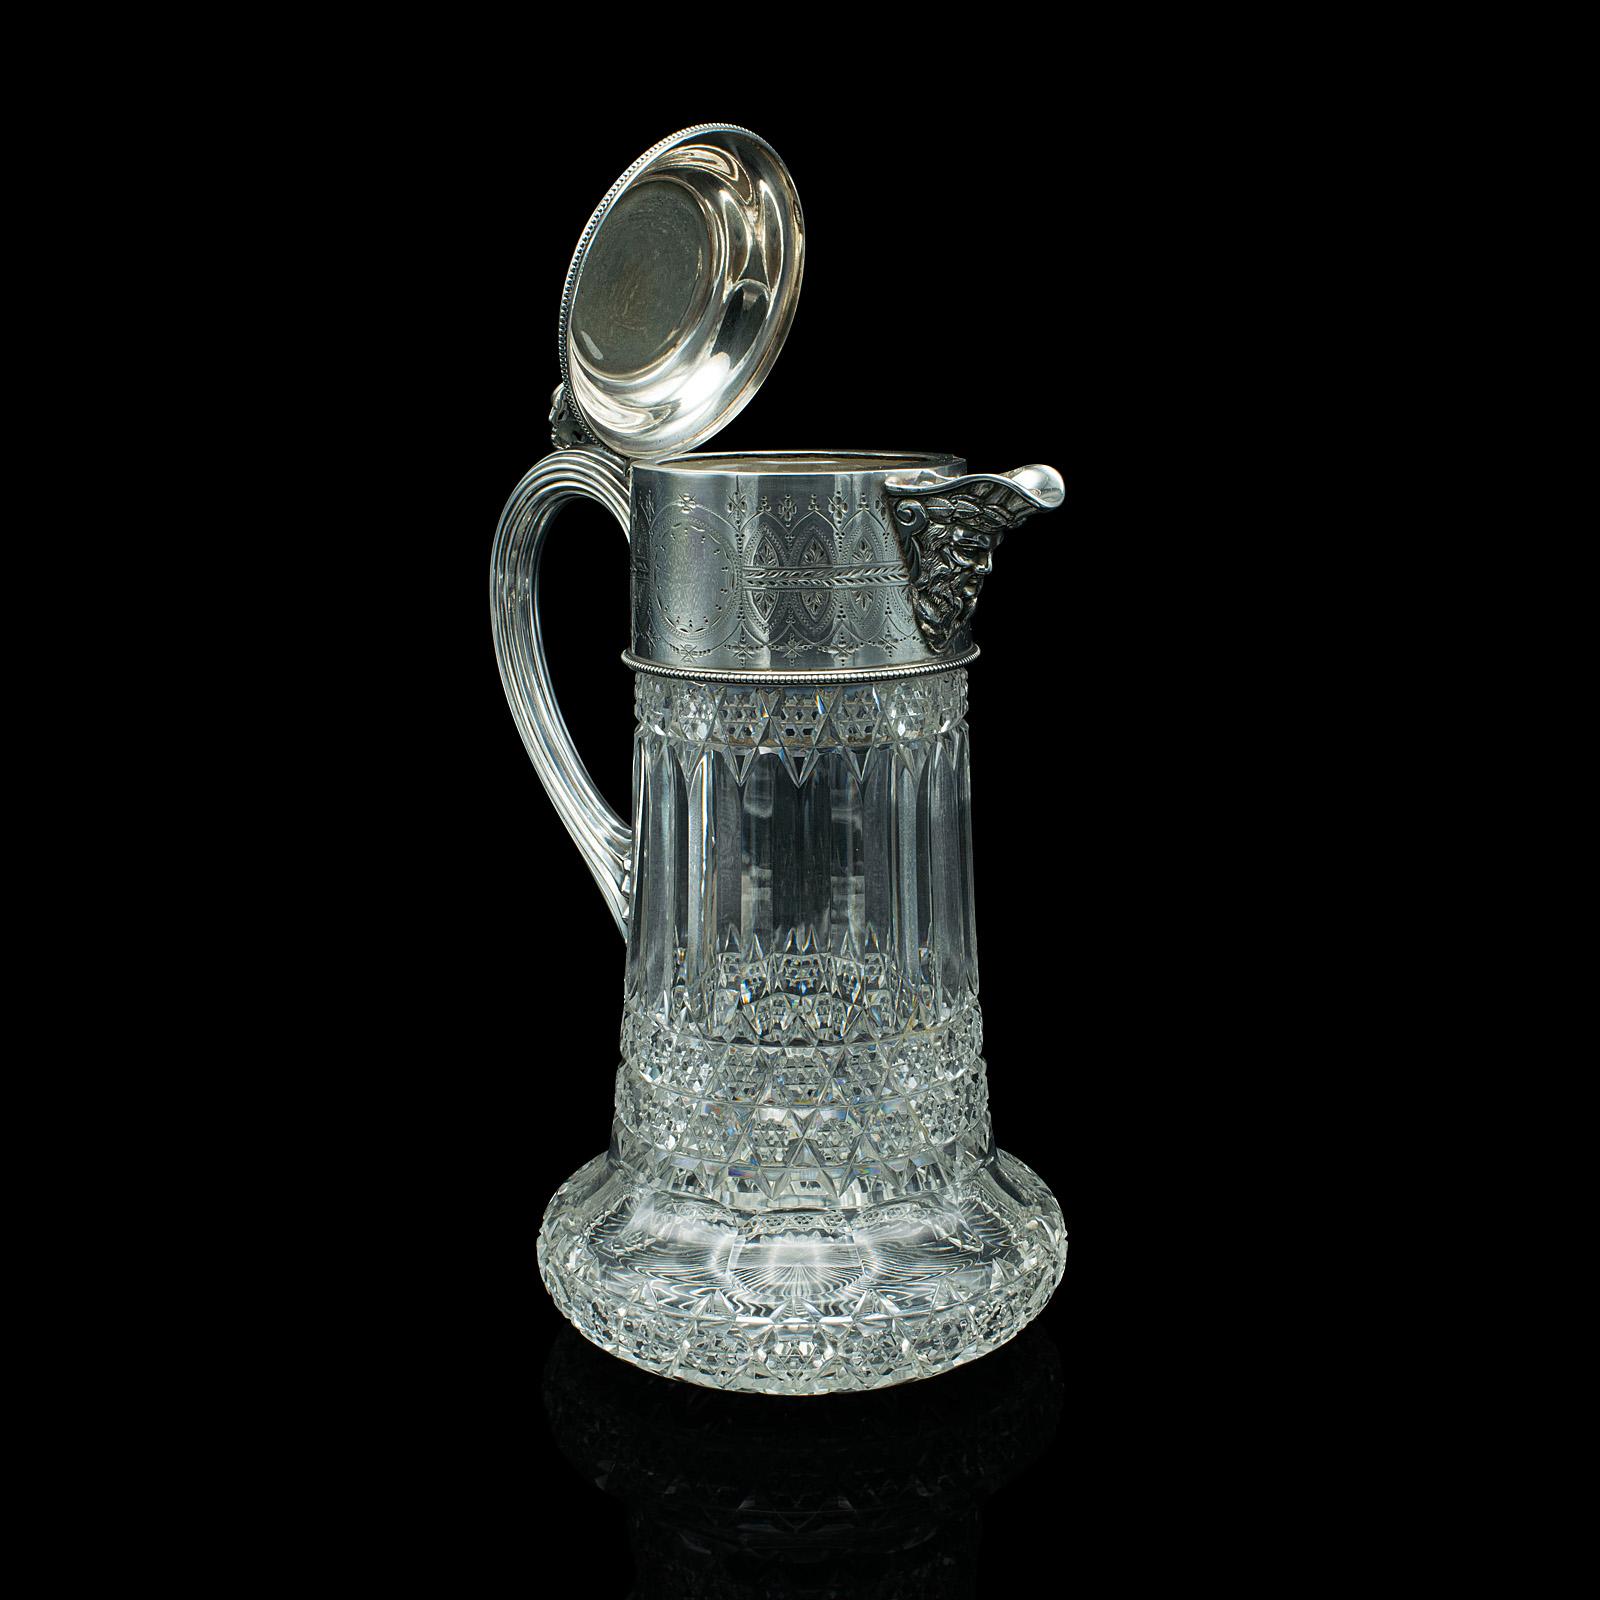 This is an antique claret jug. An English, cut glass and silver plated decanter, dating to the late Victorian period, circa 1900.

Fascinatingly decorative jug with a host of eye-catching finishes
Displays a desirable aged patina and in good